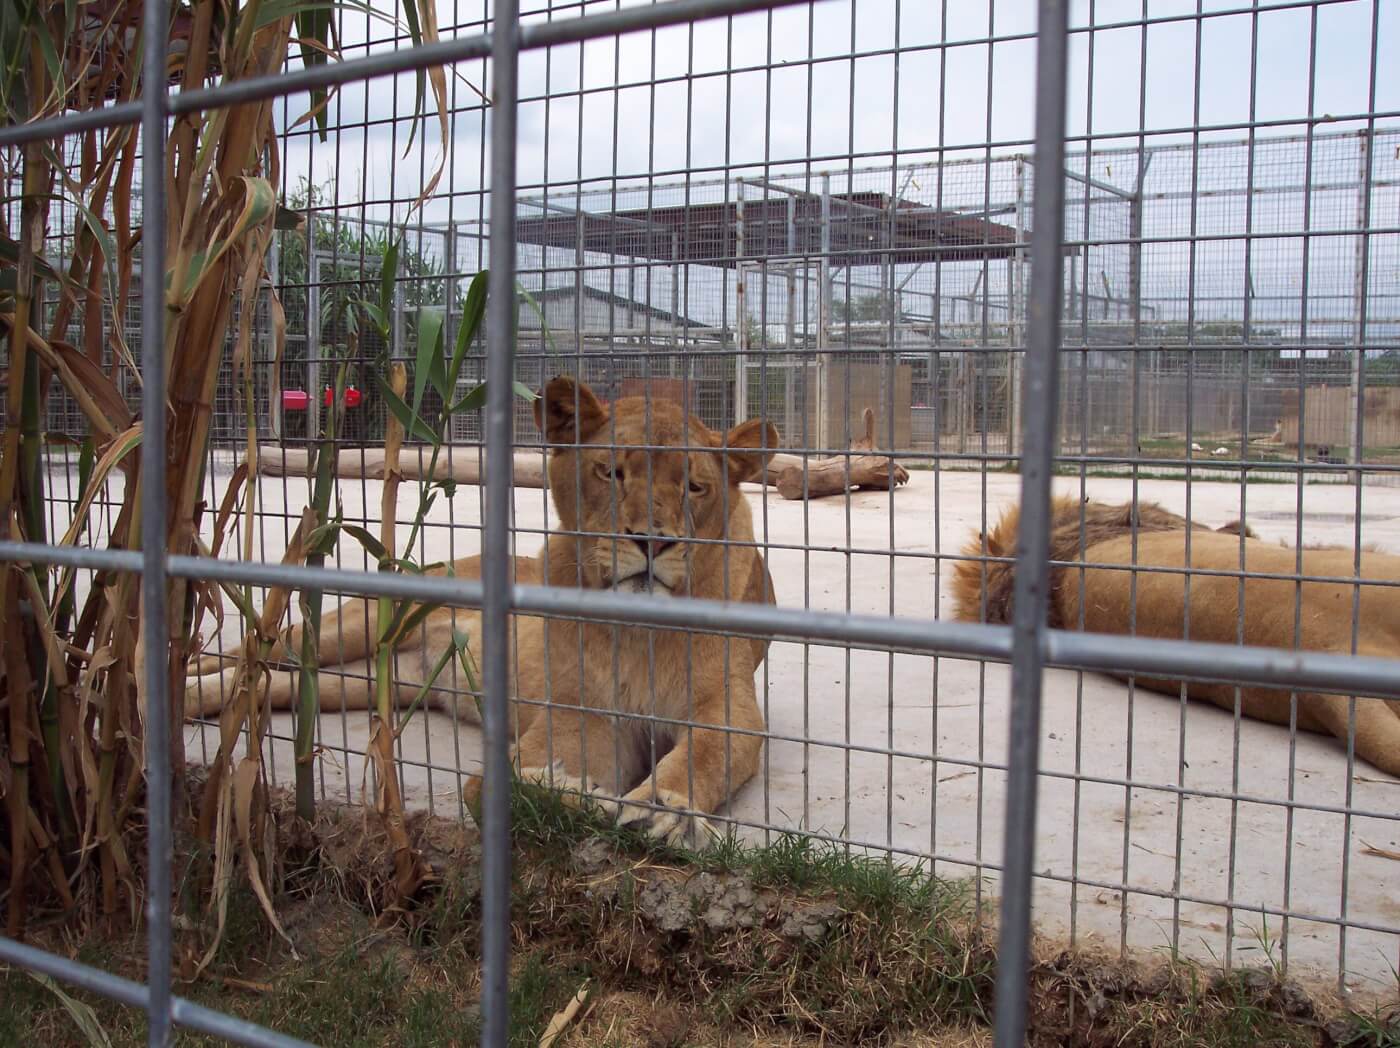 9 Reasons Not to Visit Zoos